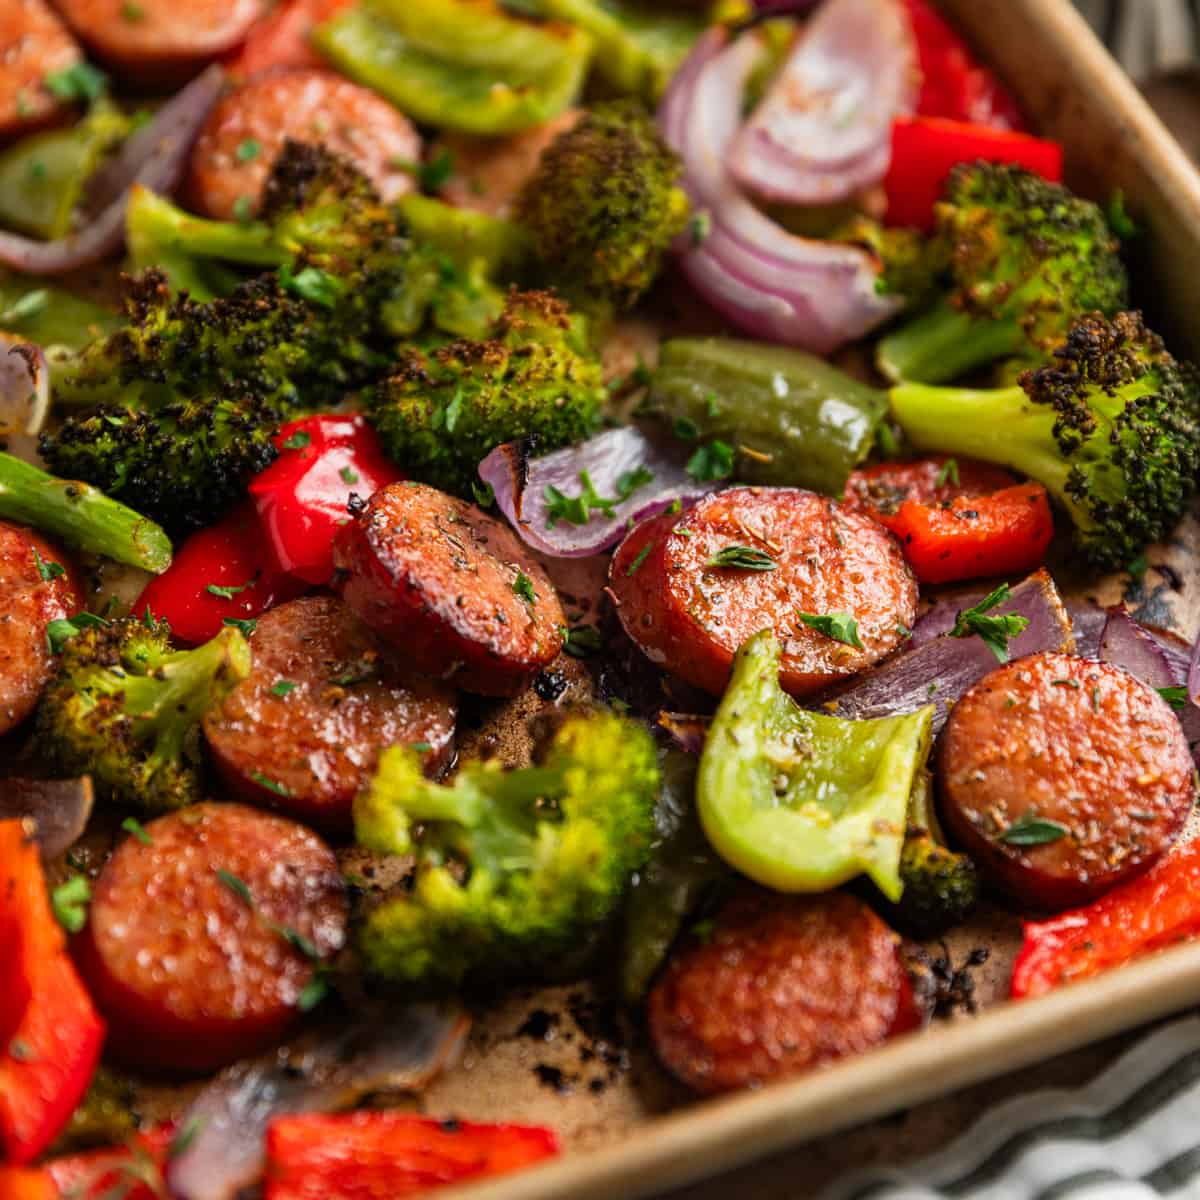 Sheet Pan Dinner: Sausage and Vegetables! - Made It. Ate It. Loved It.